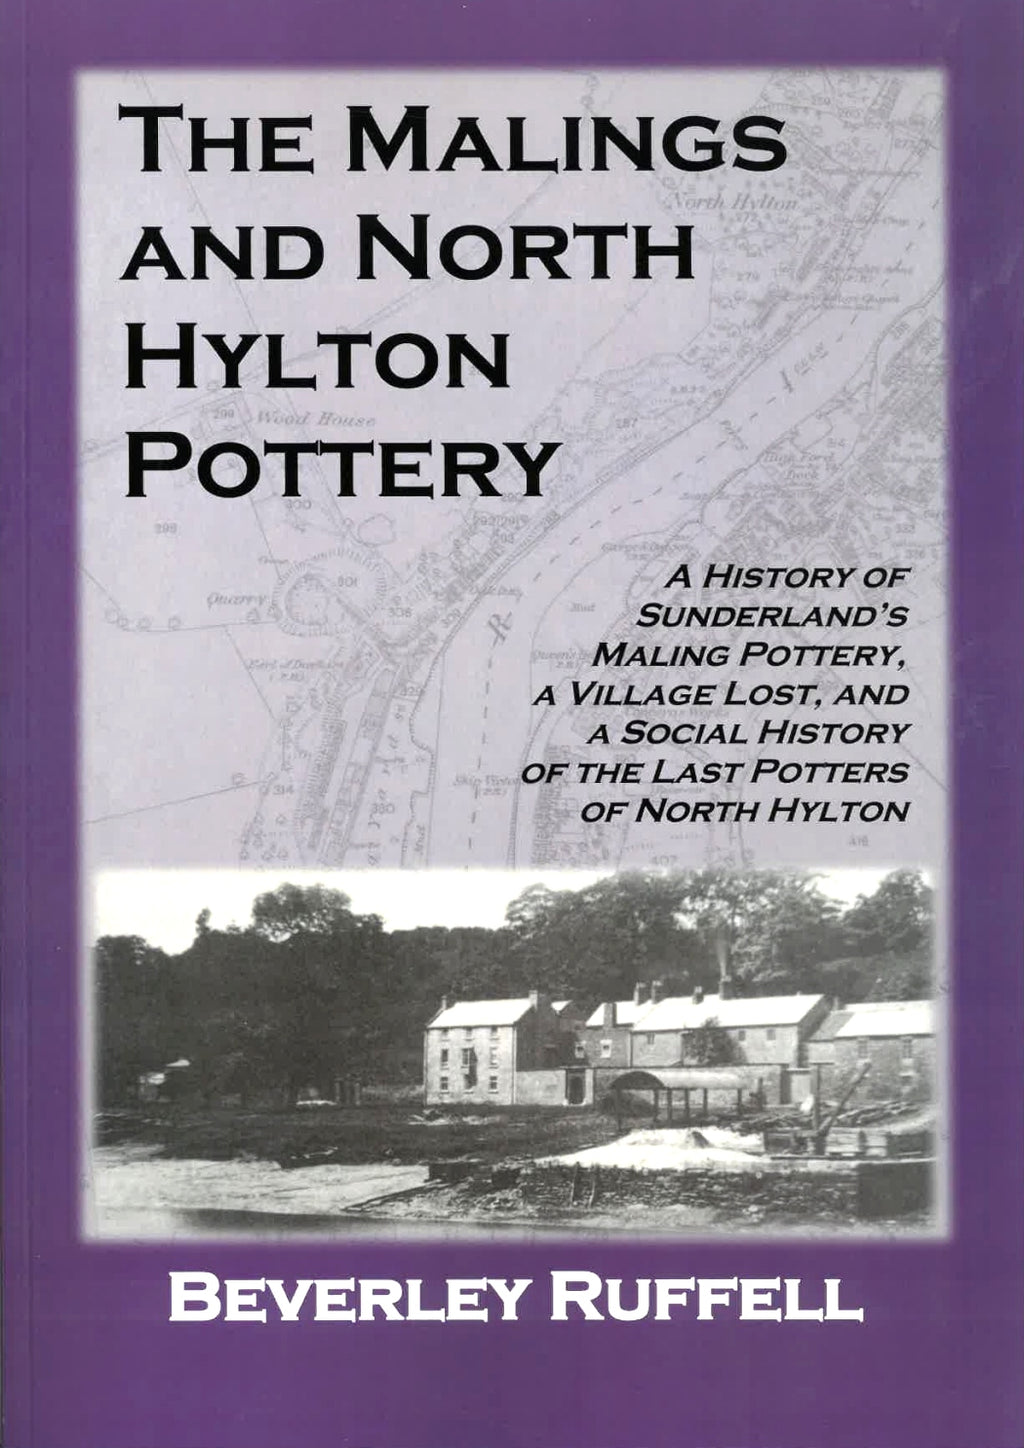 The Malings and North Hylton Pottery - Book by Beverley Ruffell